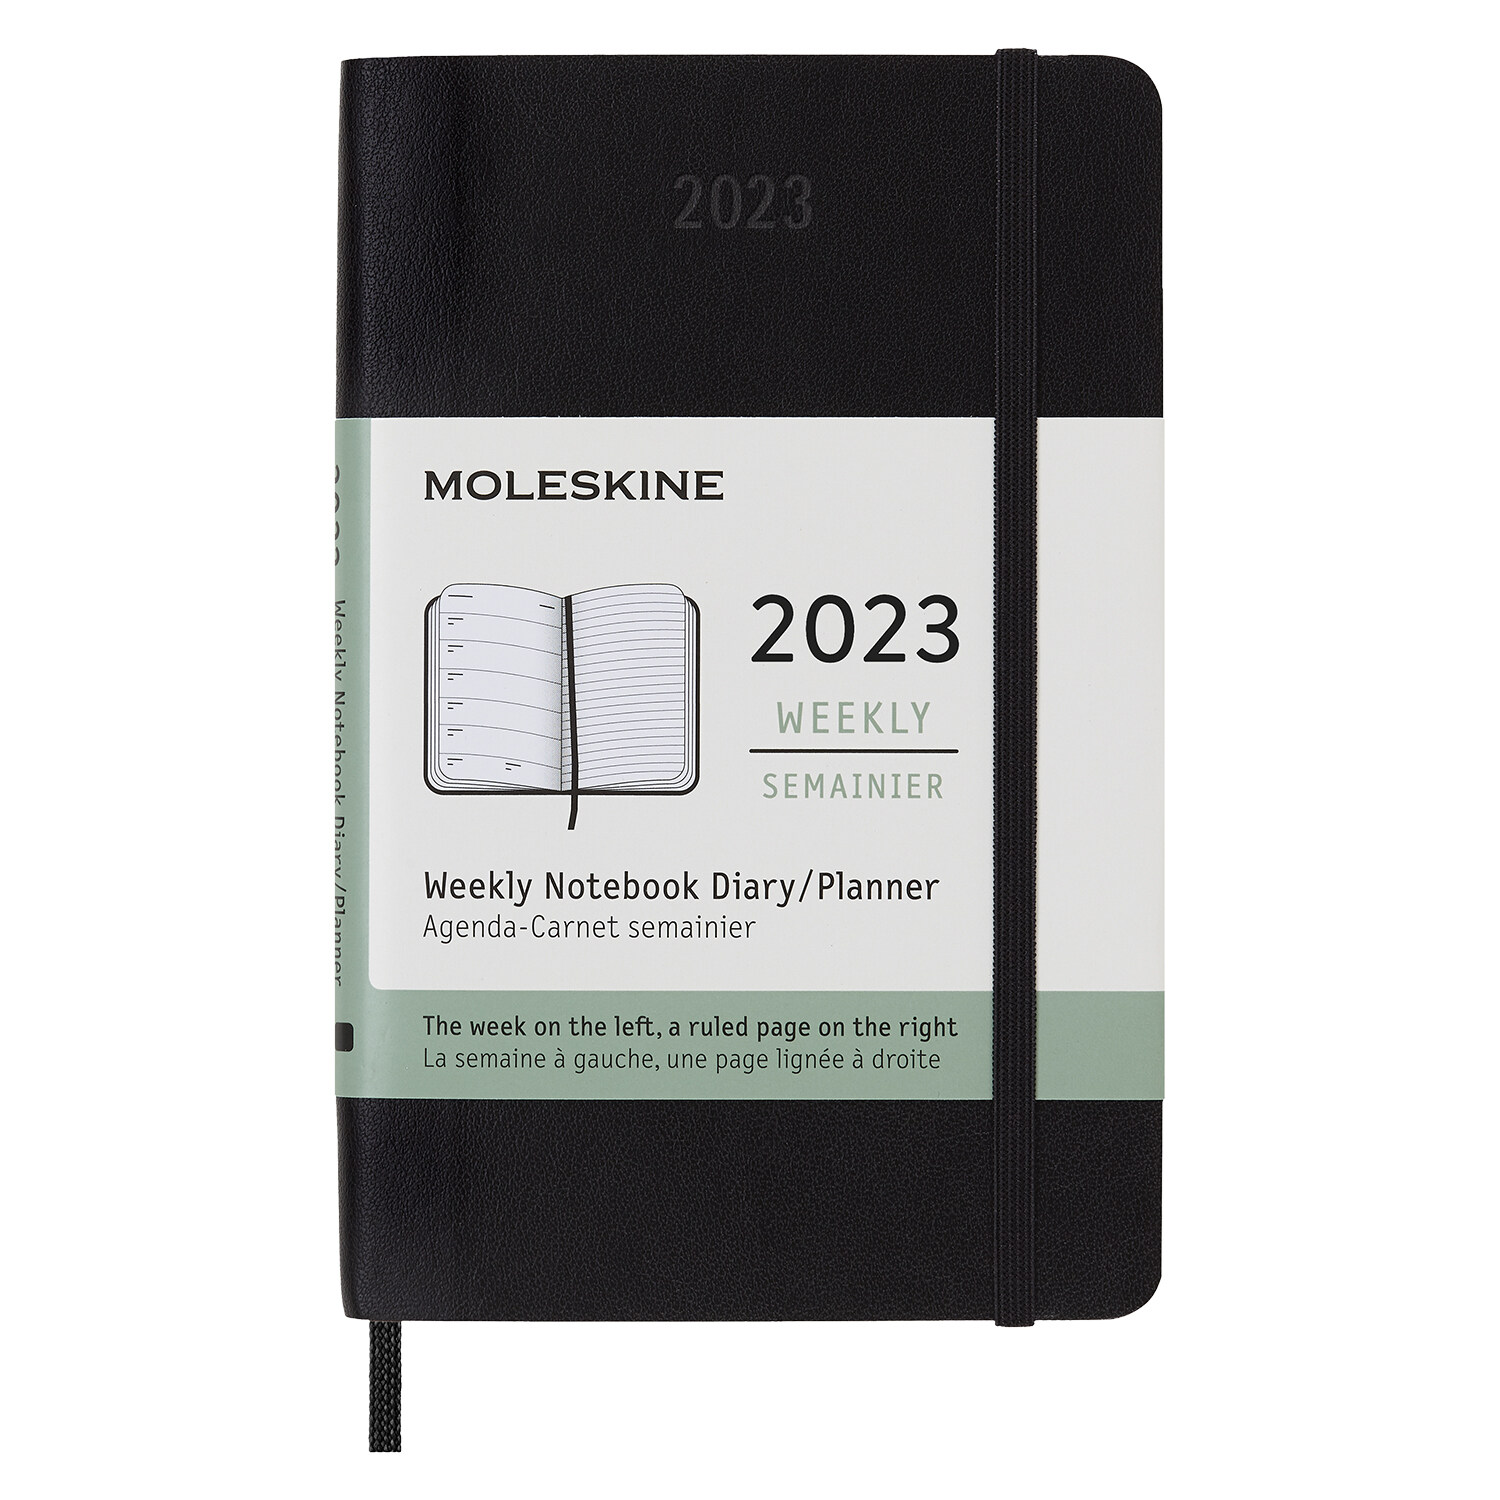 Moleskine 2023 Weekly Notebook Planner, 12m, Pocket, Black, Soft Cover (3.5 X 5.5) (Other)